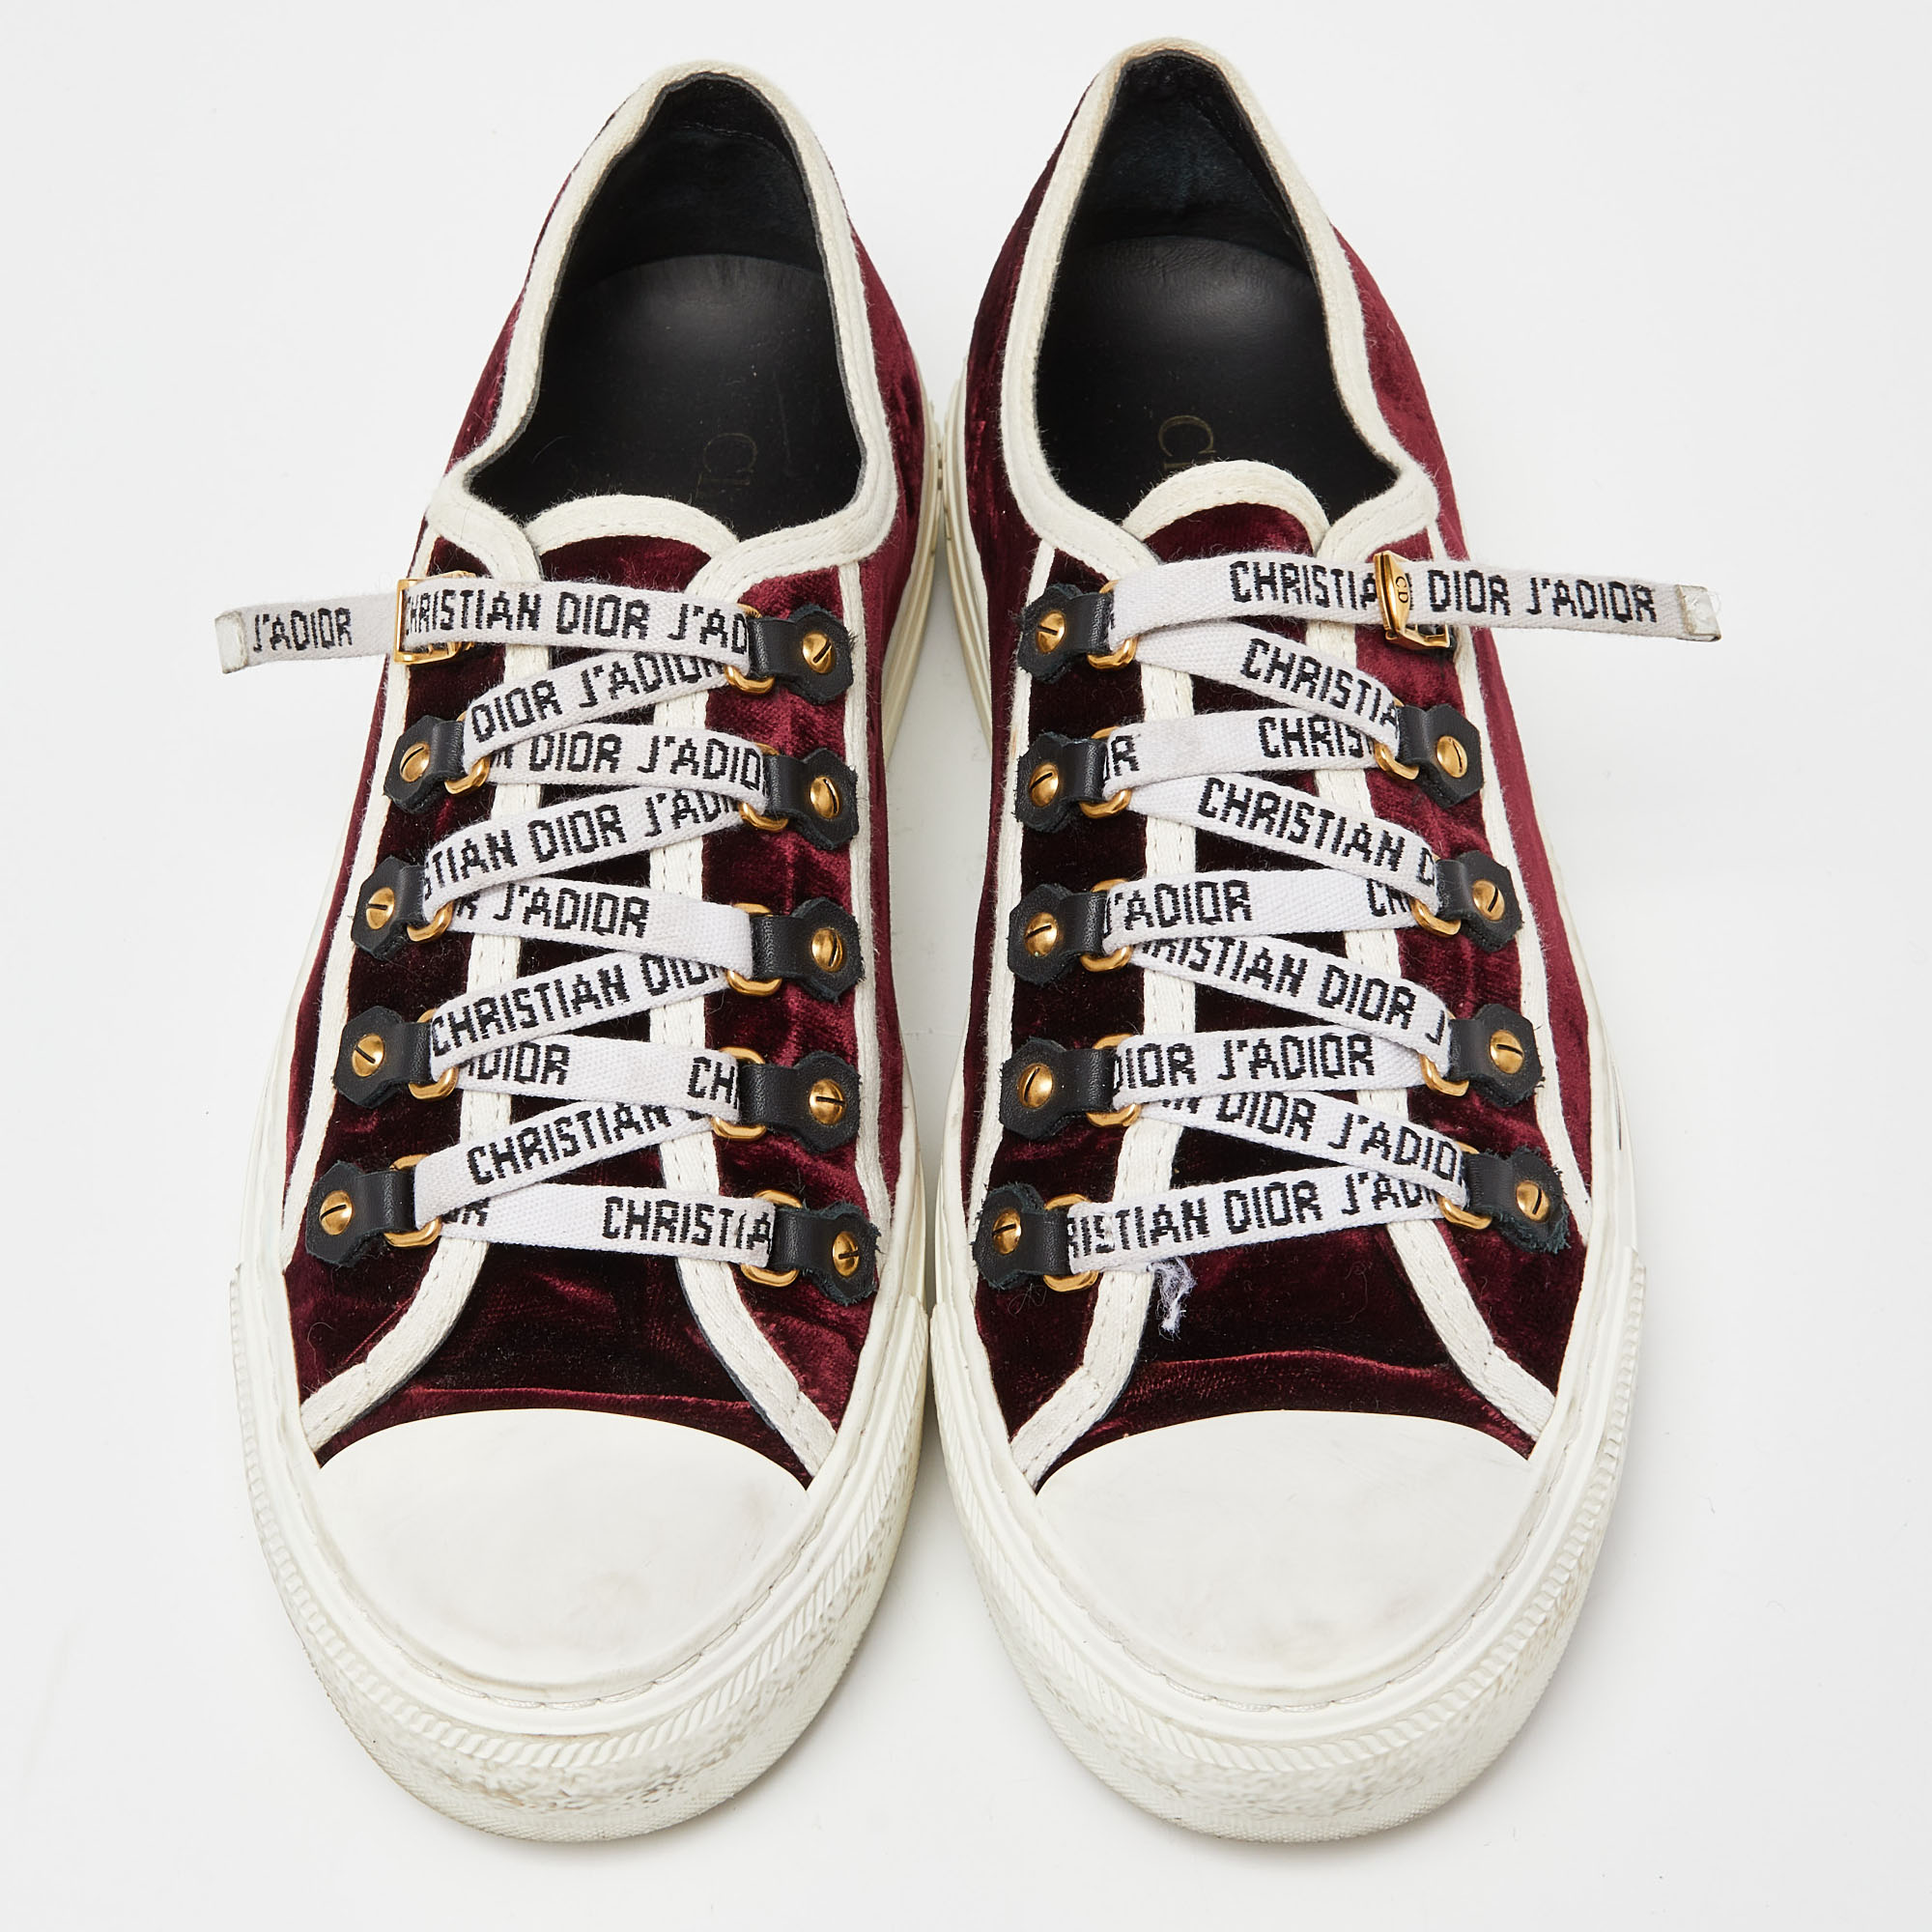 Dior Burgundy/White Velvet And Rubber Walk'n'Dior Sneakers Size 38.5